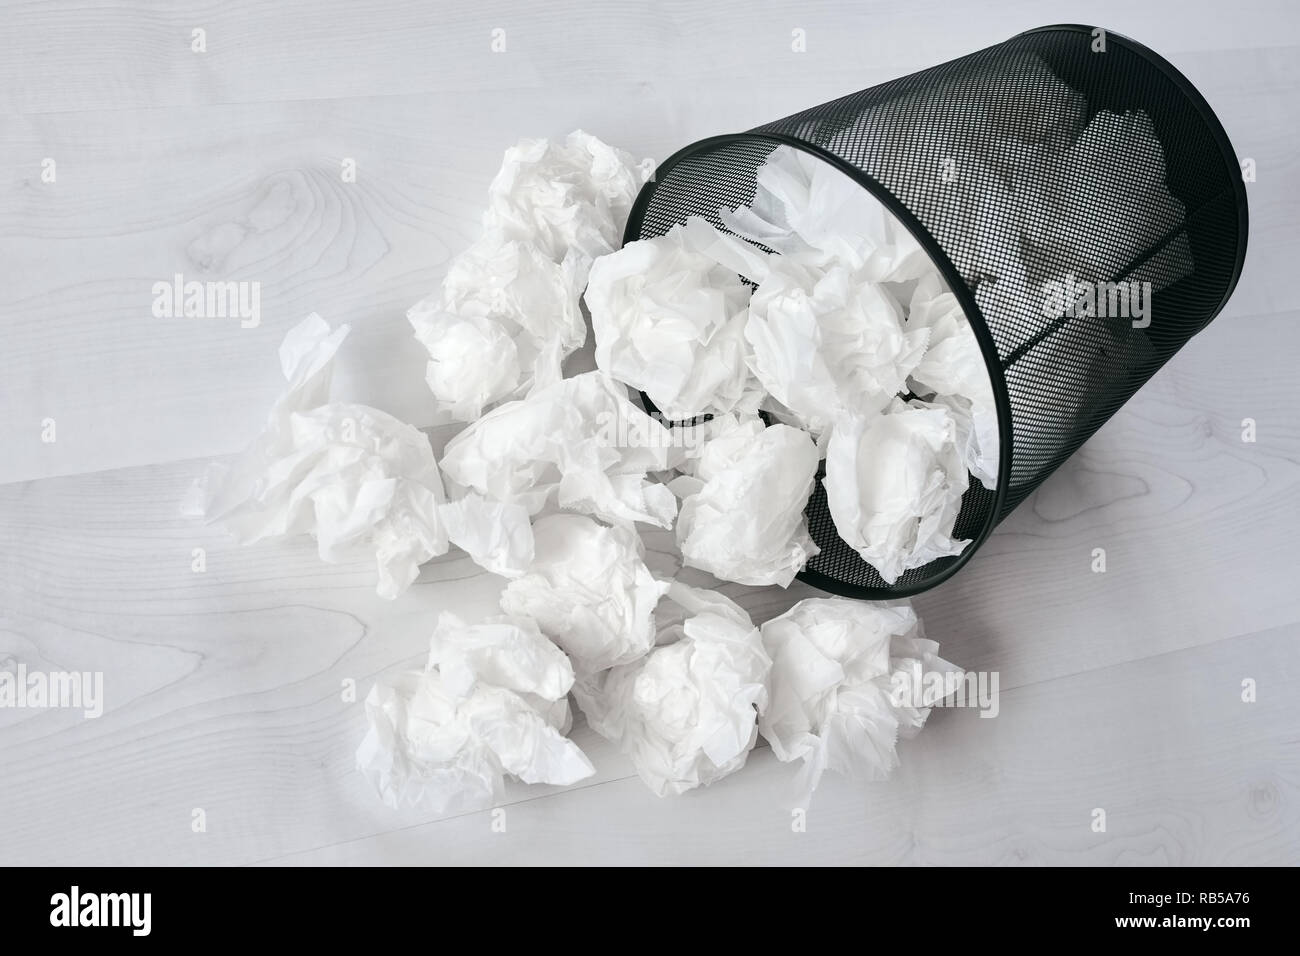 Office trash can full with documents on a white Stock Photo - Alamy